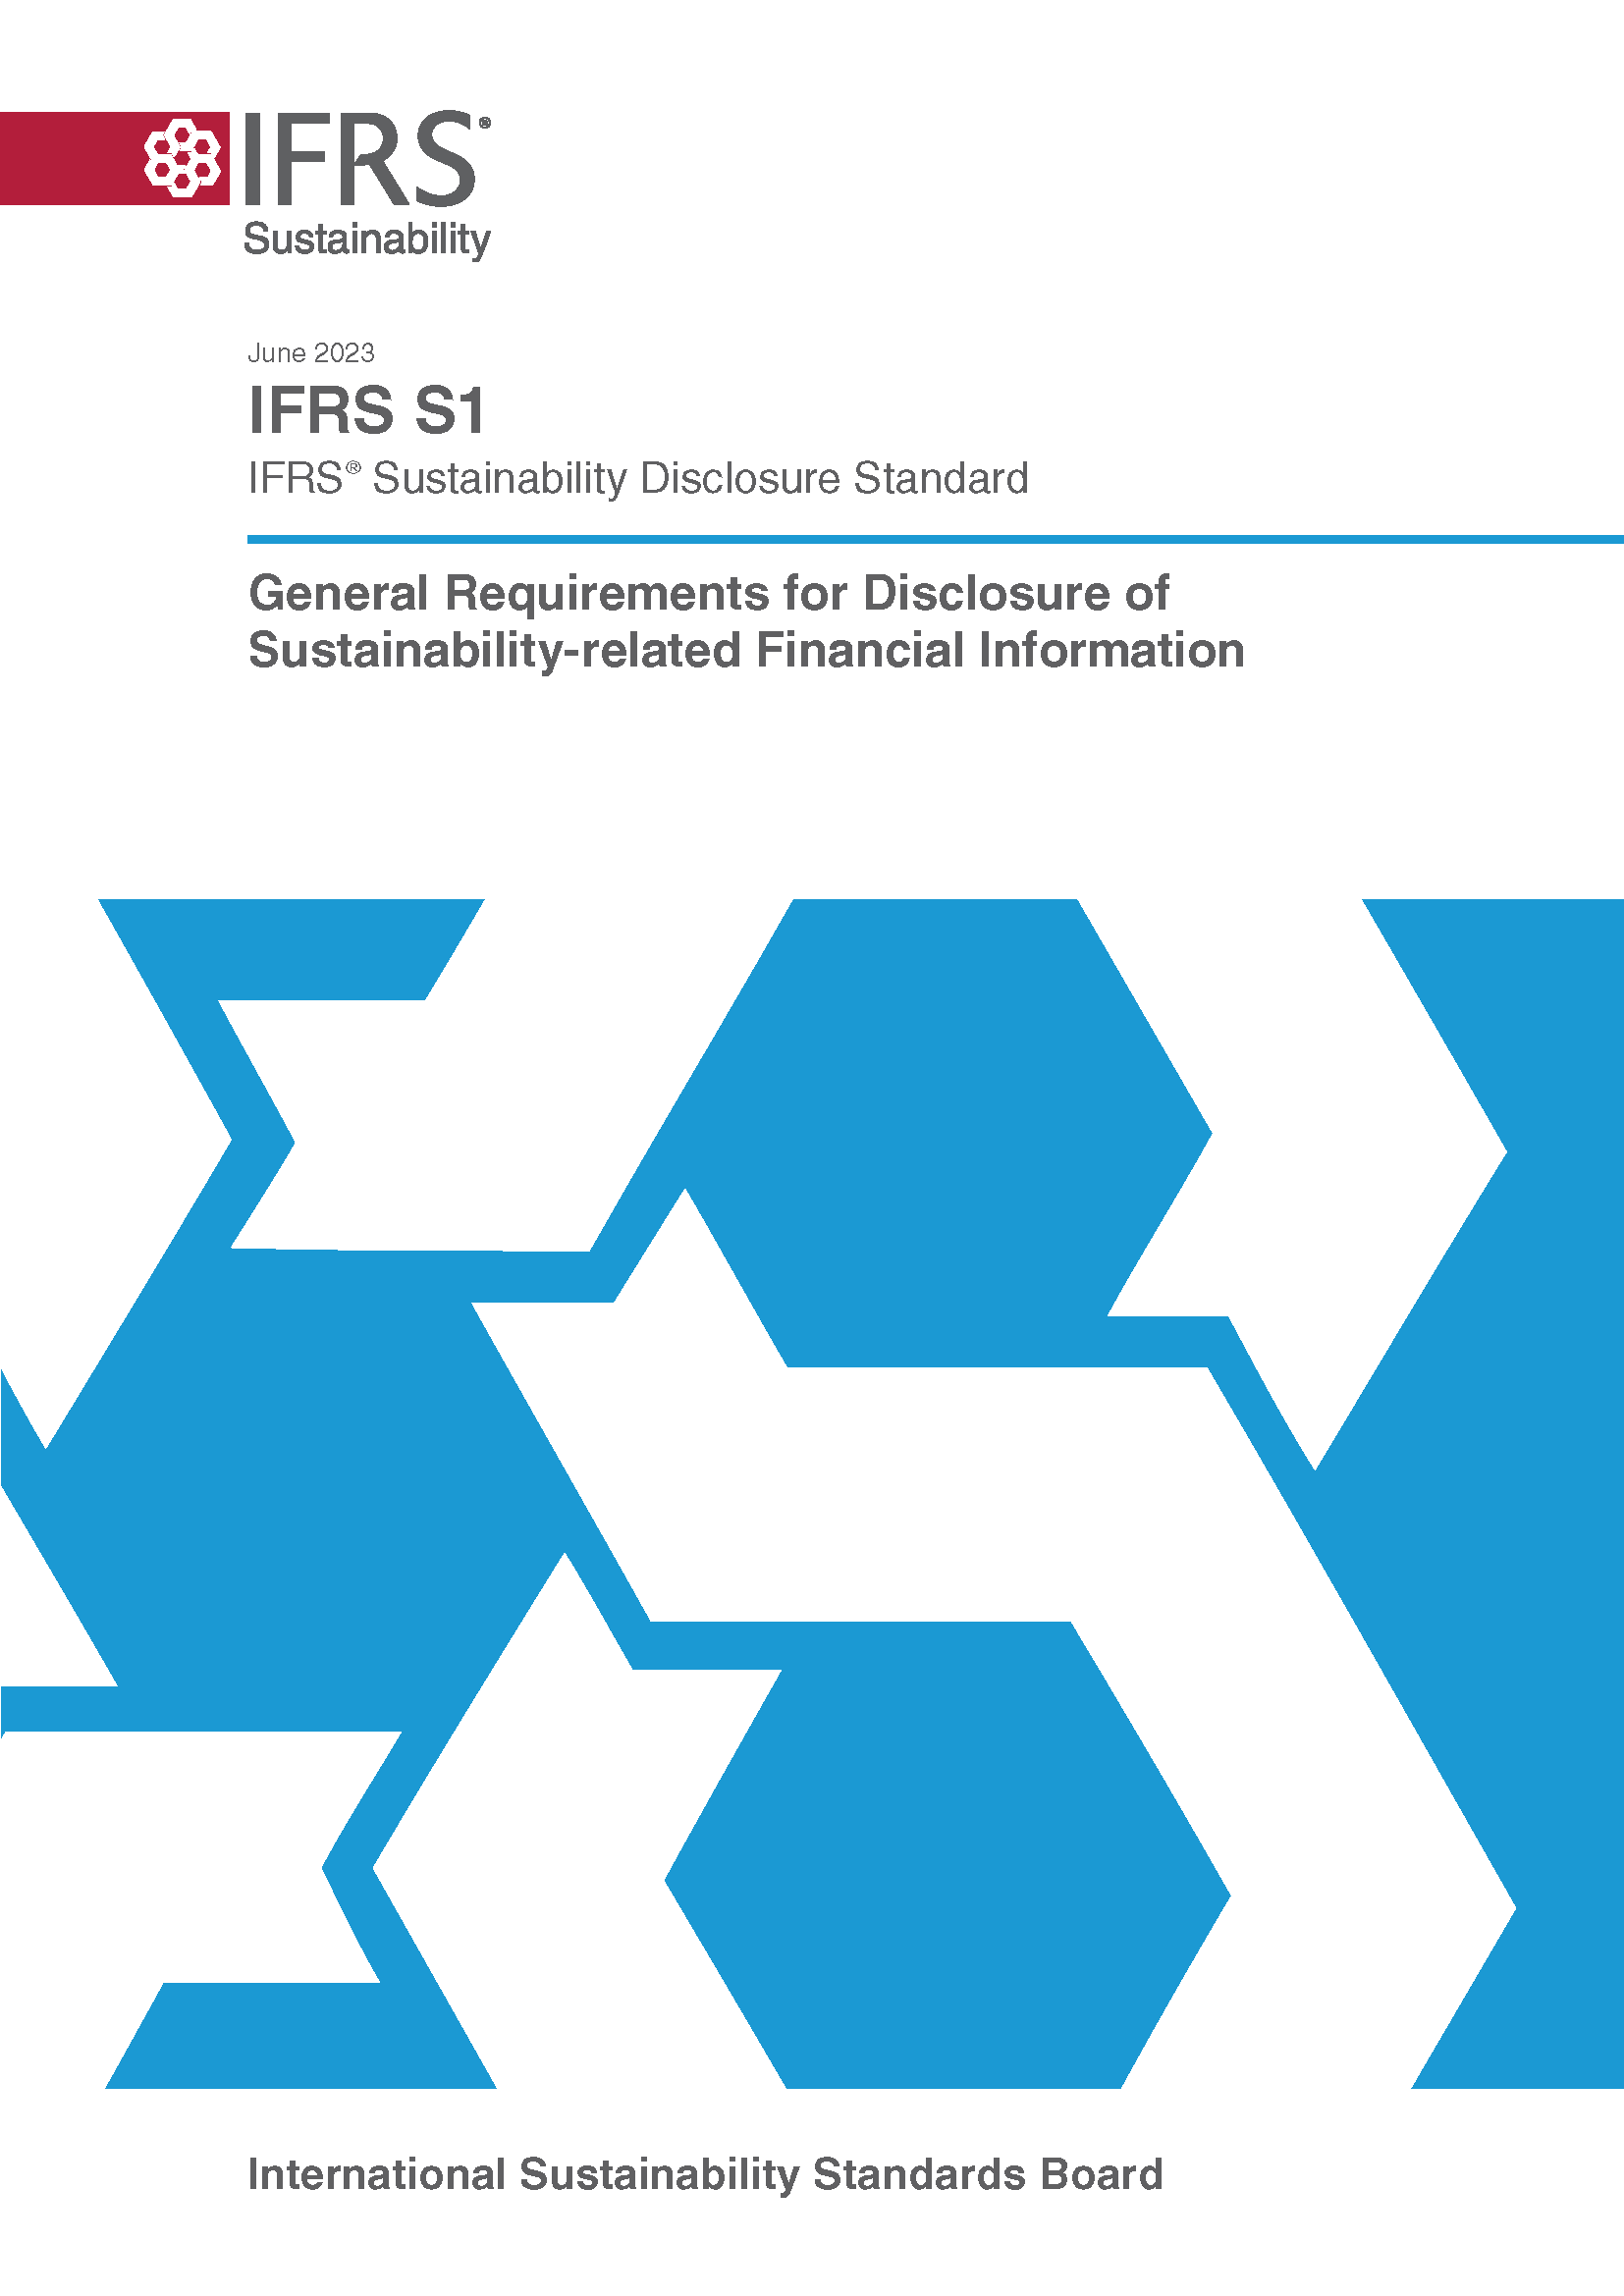 IFRS S1 General requirements for disclosure of sustainability related